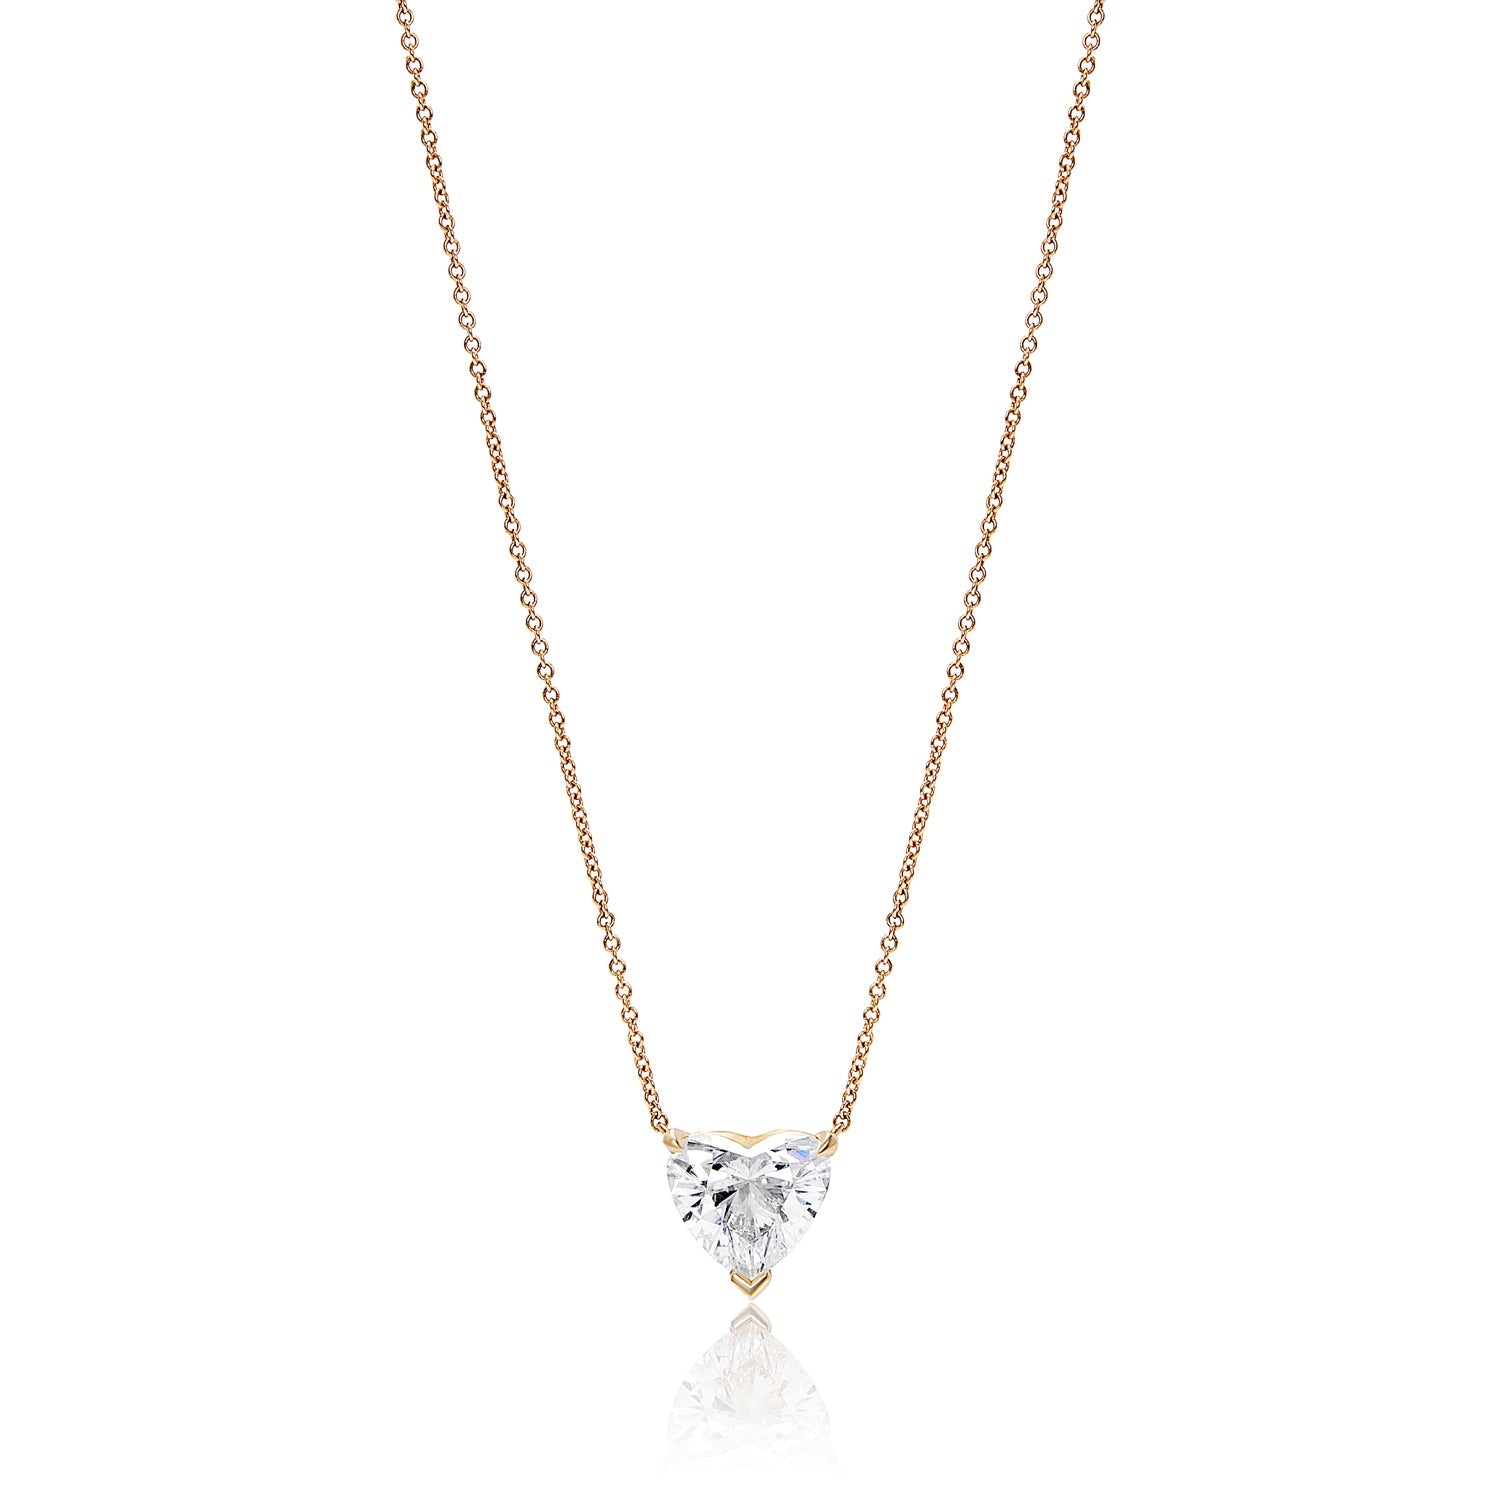 Angie 4 Carat Heart Shape SI2 Diamond Necklace in 18K Yellow Gold For Ladies. GIA Full View